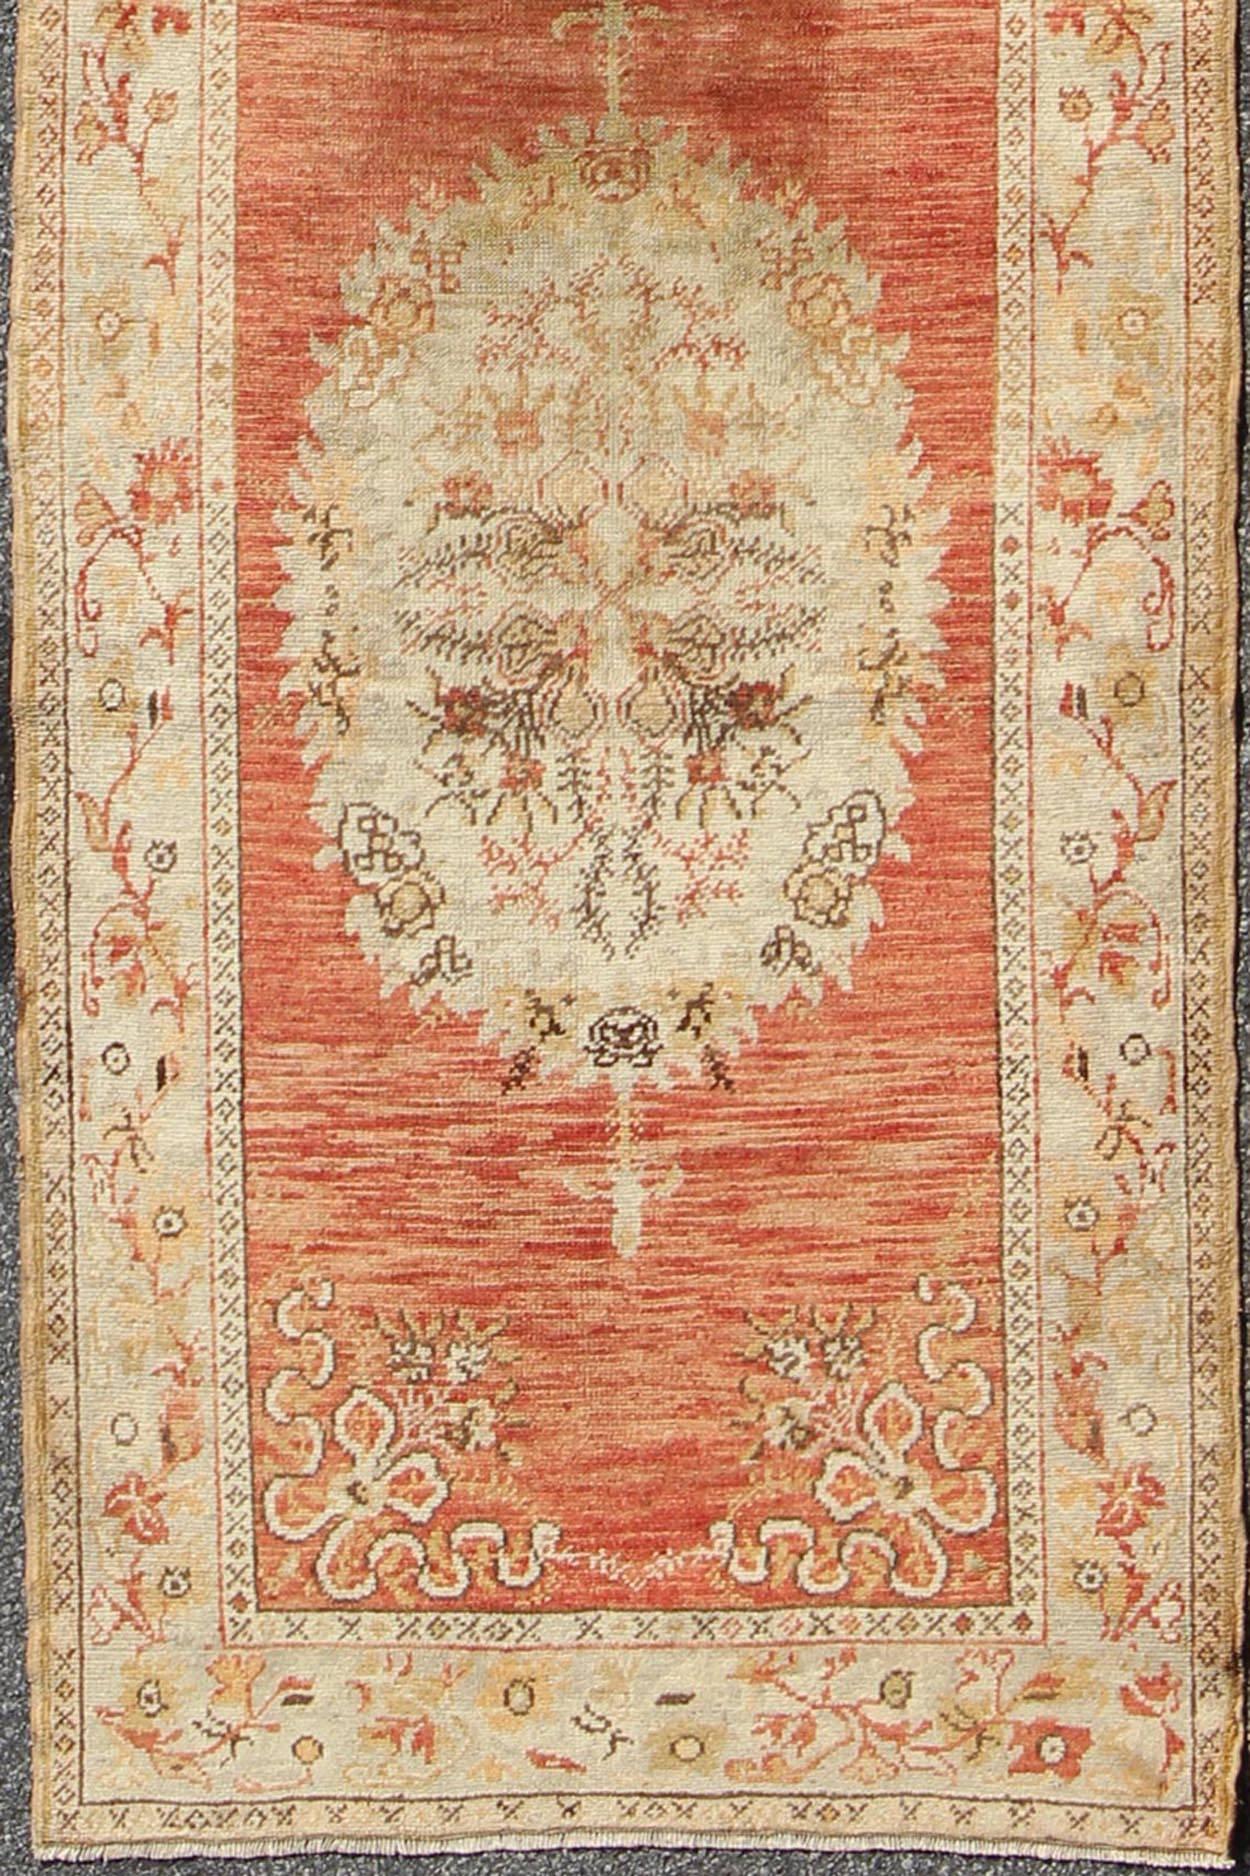 Vintage Turkish Oushak runner with floral medallions in orange red, olive green and cream, rug na-54617, country of origin / type: Turkey / Oushak, circa mid-20th century.

This beautiful vintage Oushak runner from mid-20th century Turkey features a